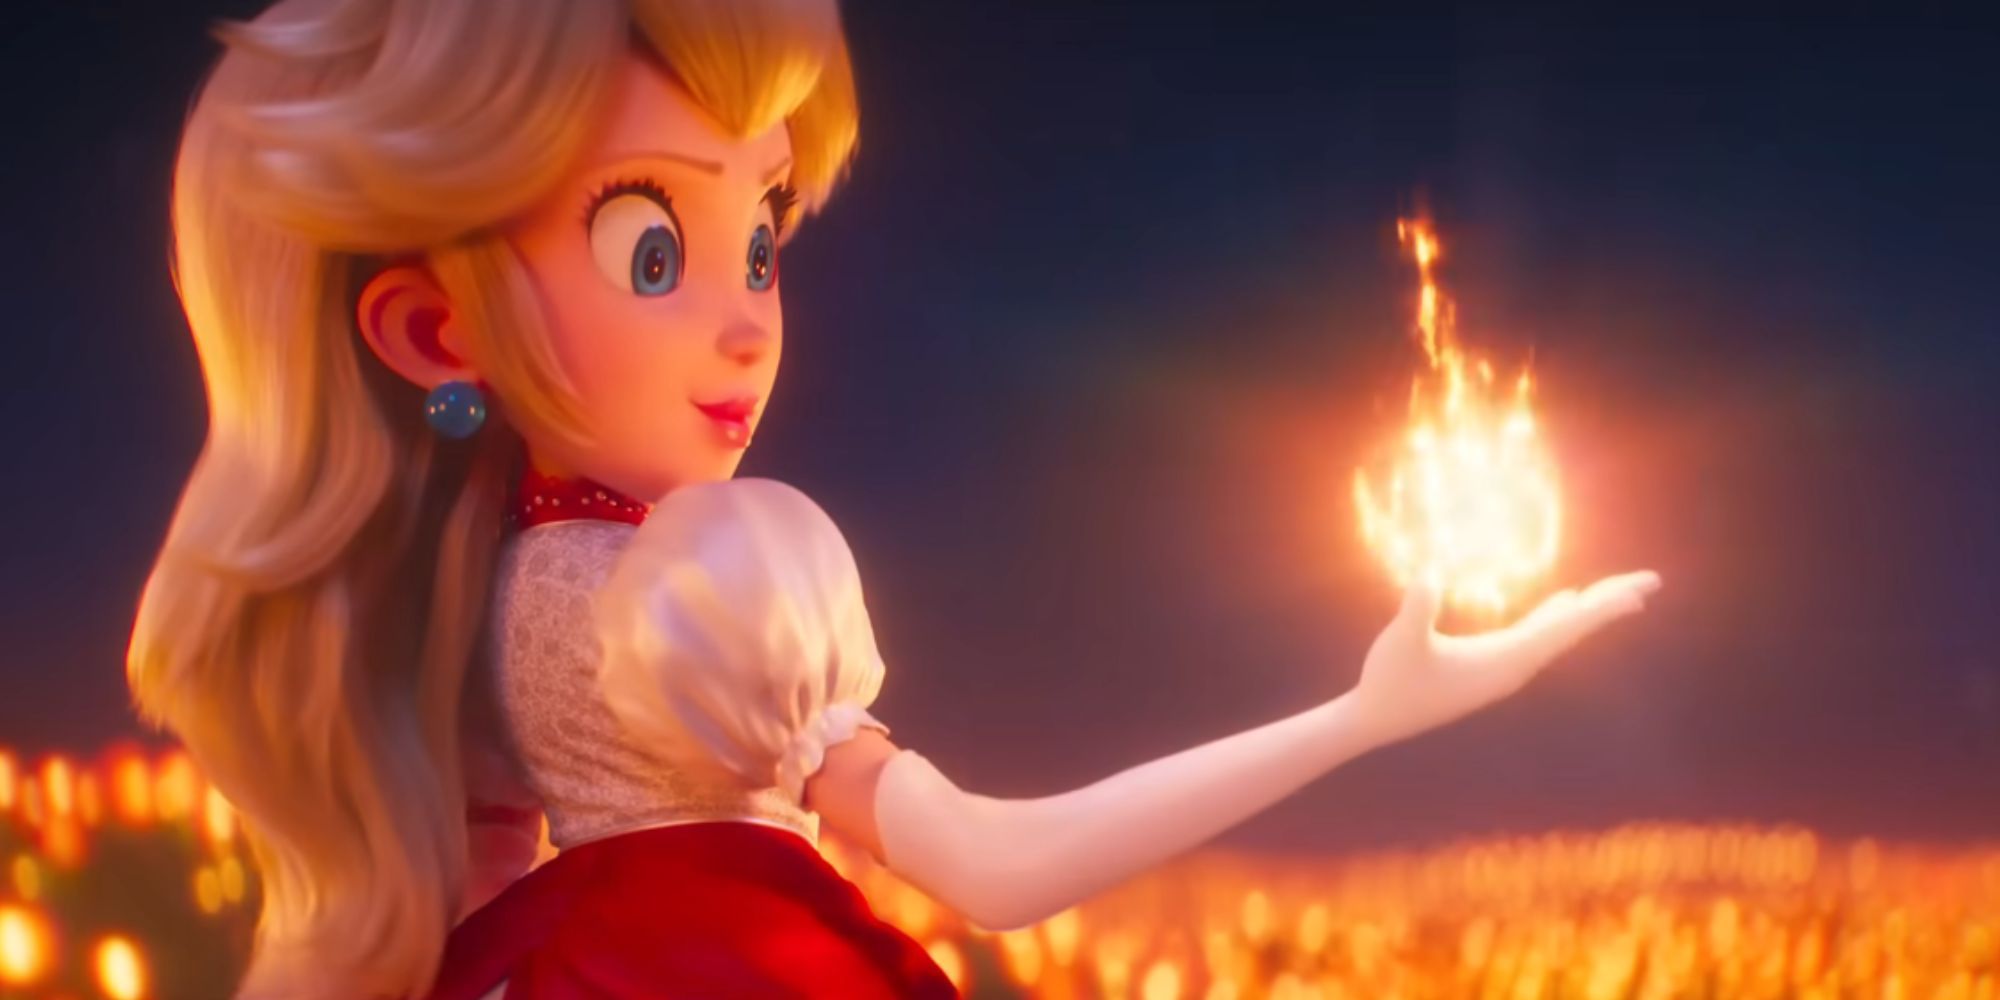 Princess Peach holds a fireball in her hand in a field of Fire Flowers